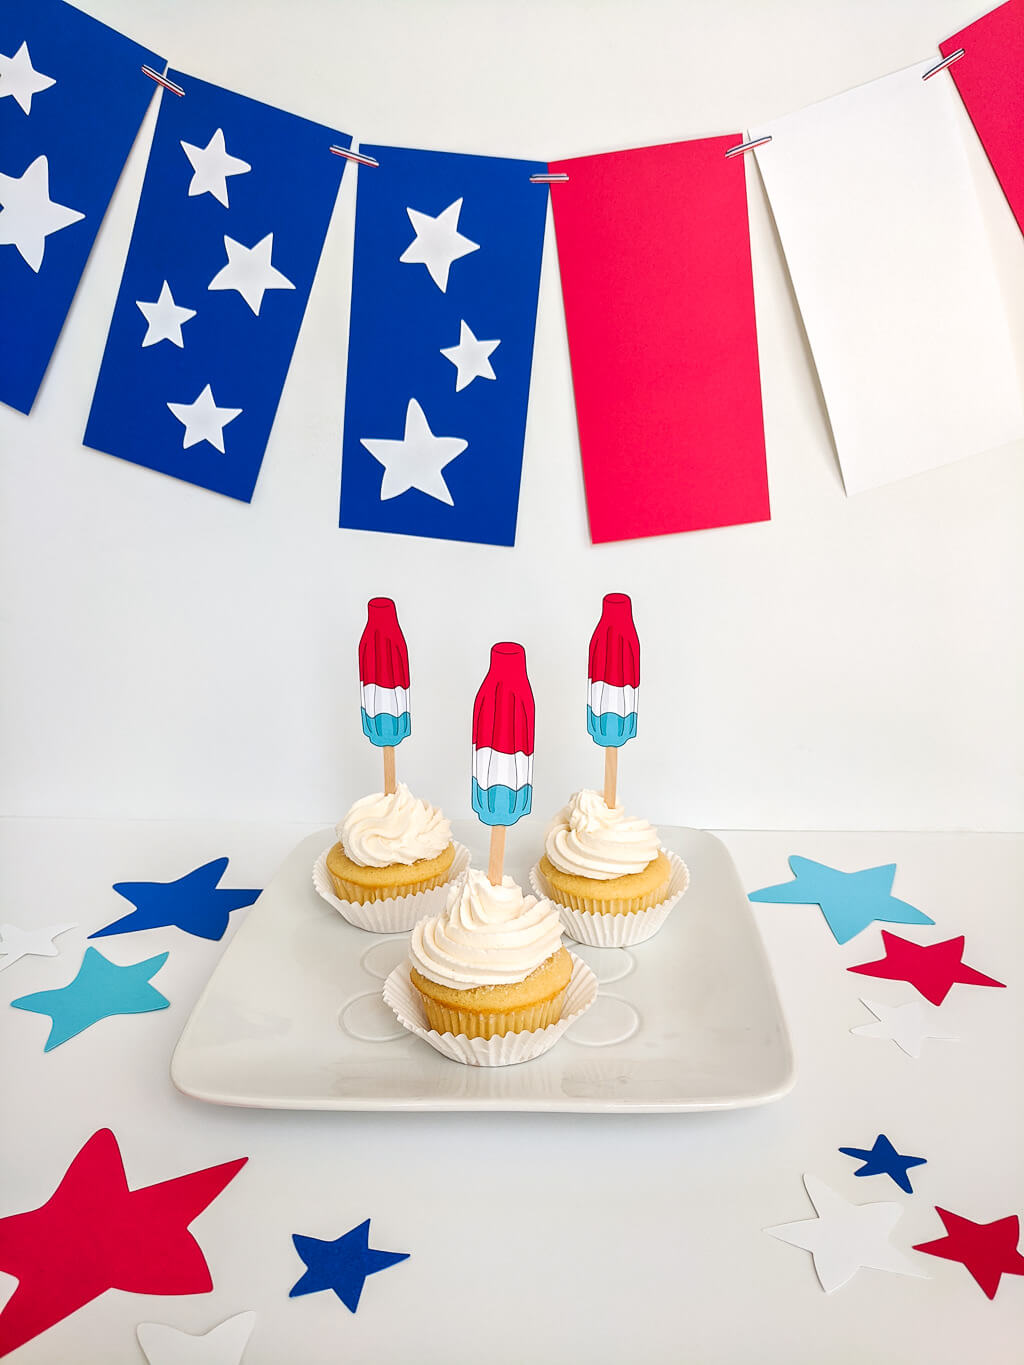 DIY 4th of July party decorations free printable templates